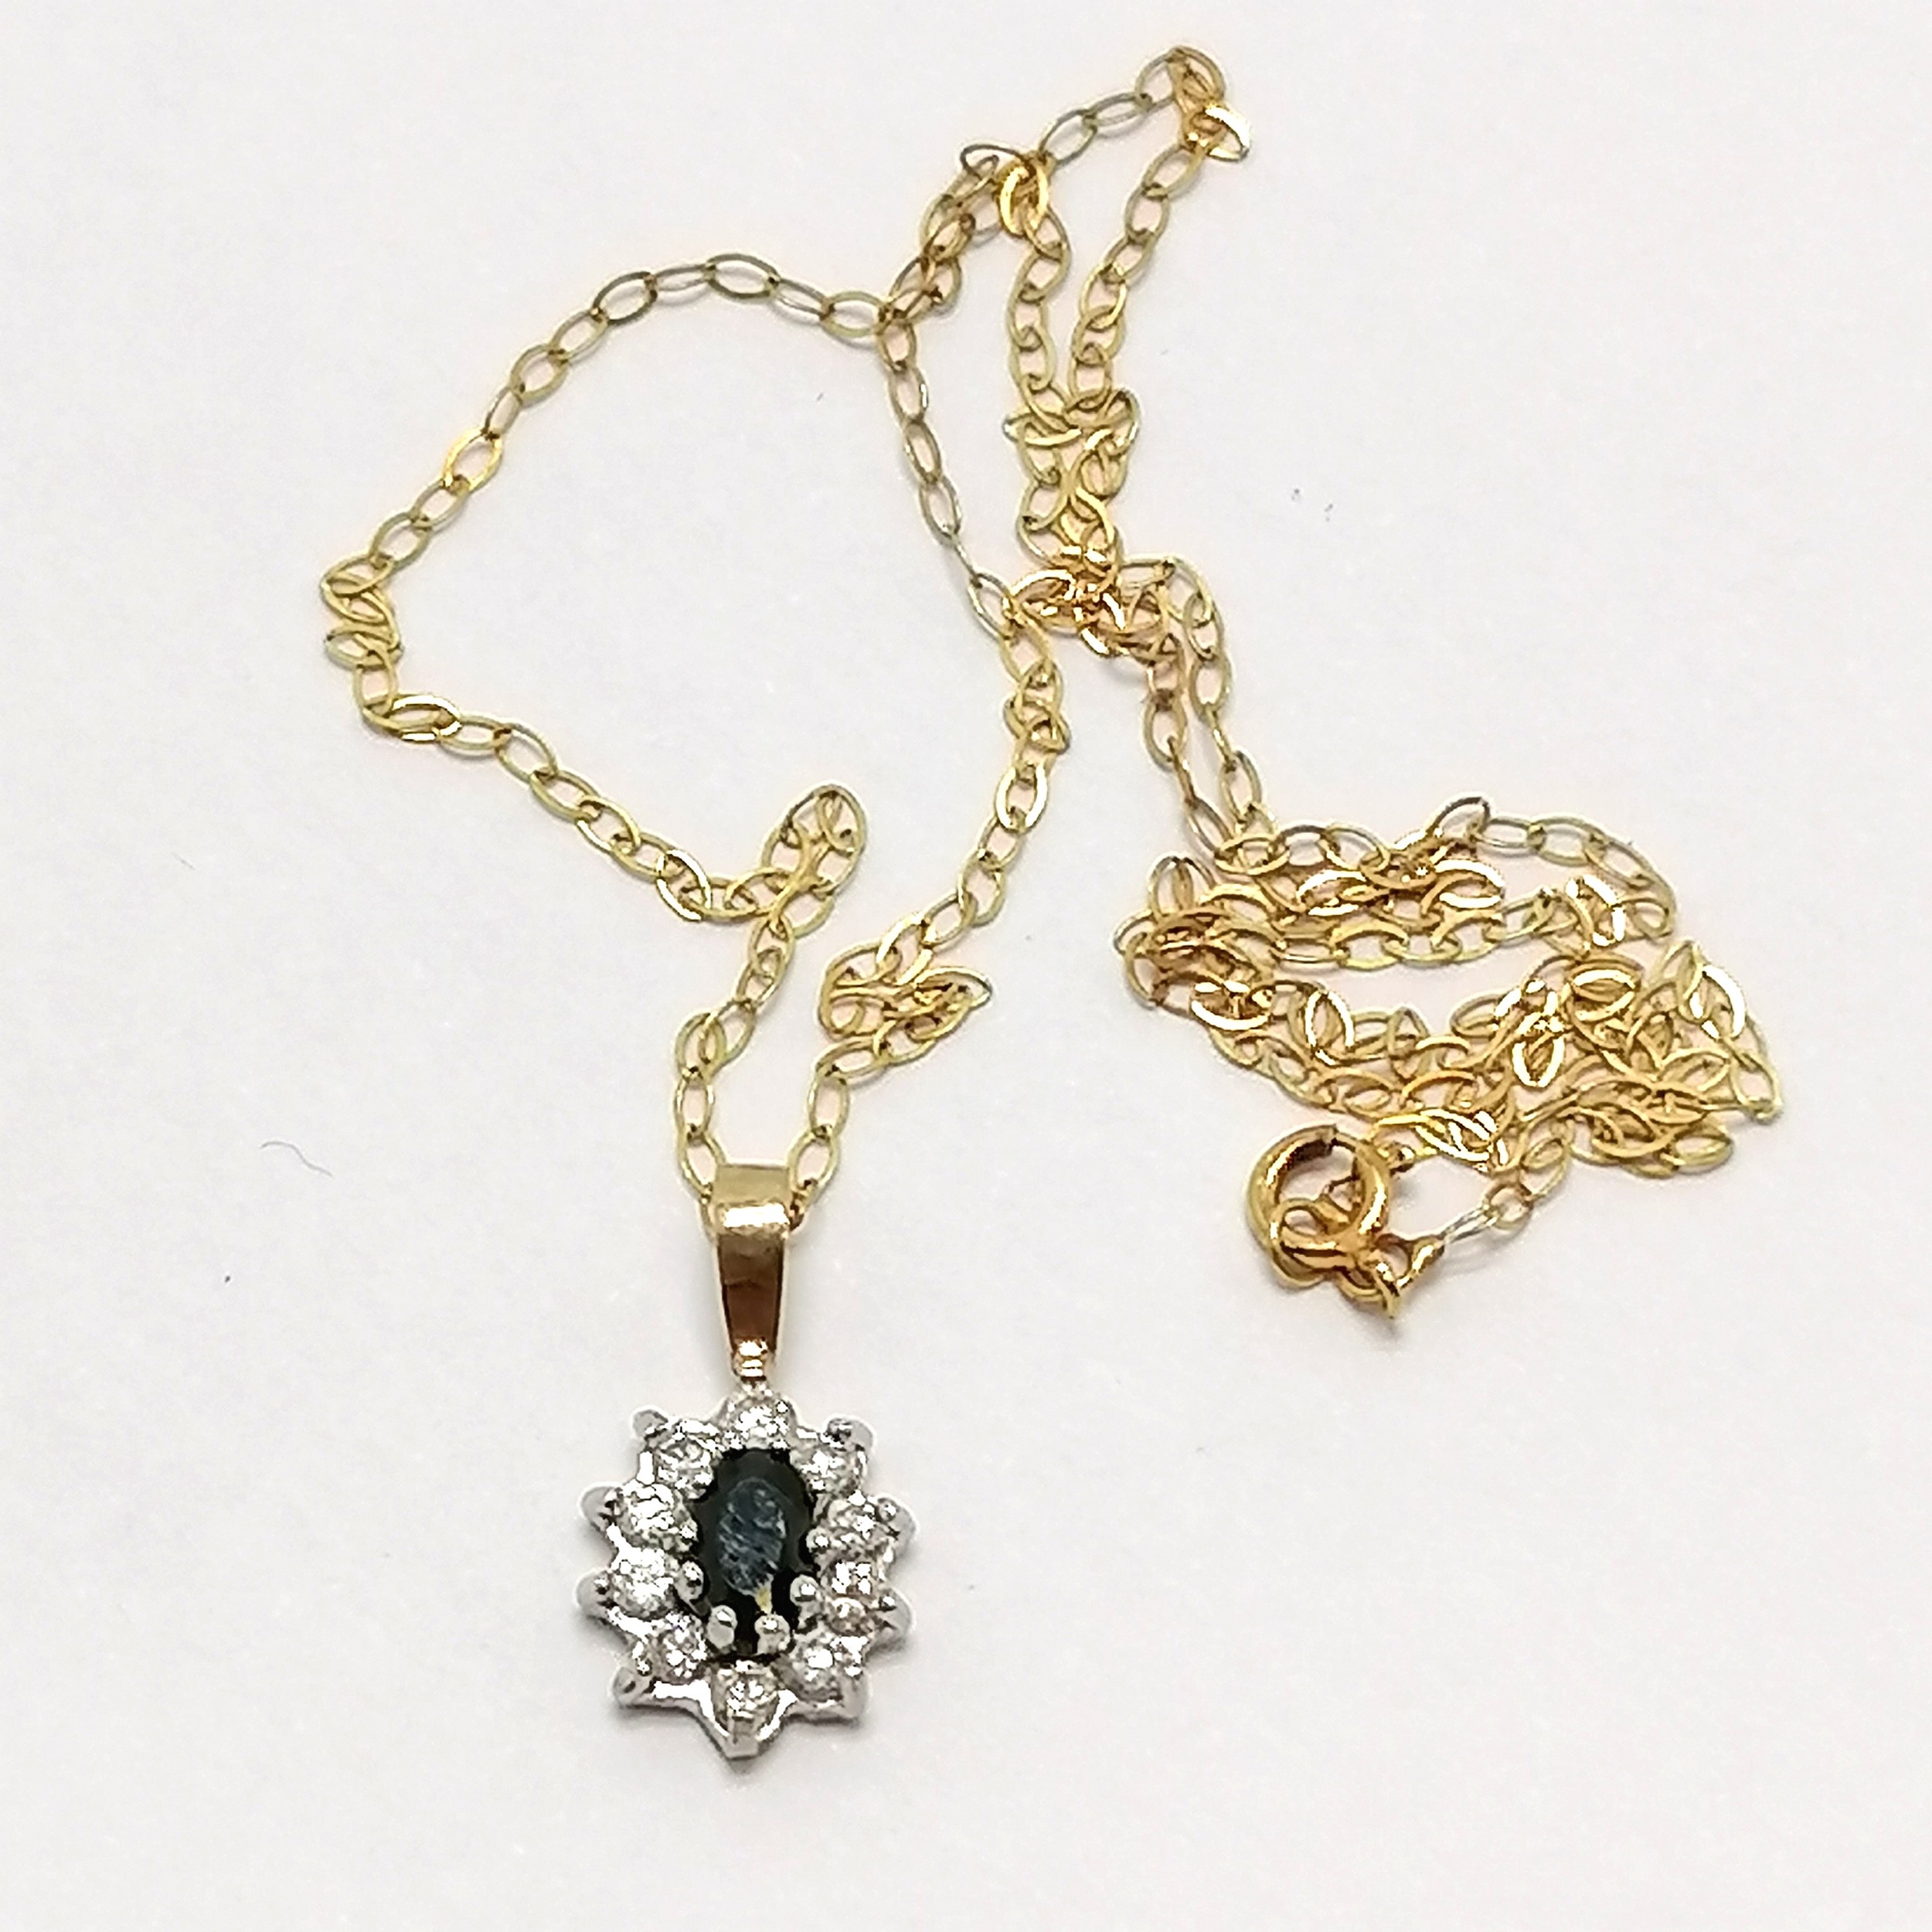 Unmarked gold sapphire & white stone pendant on a fine 9ct marked gold 40cm chain - total weight 1g